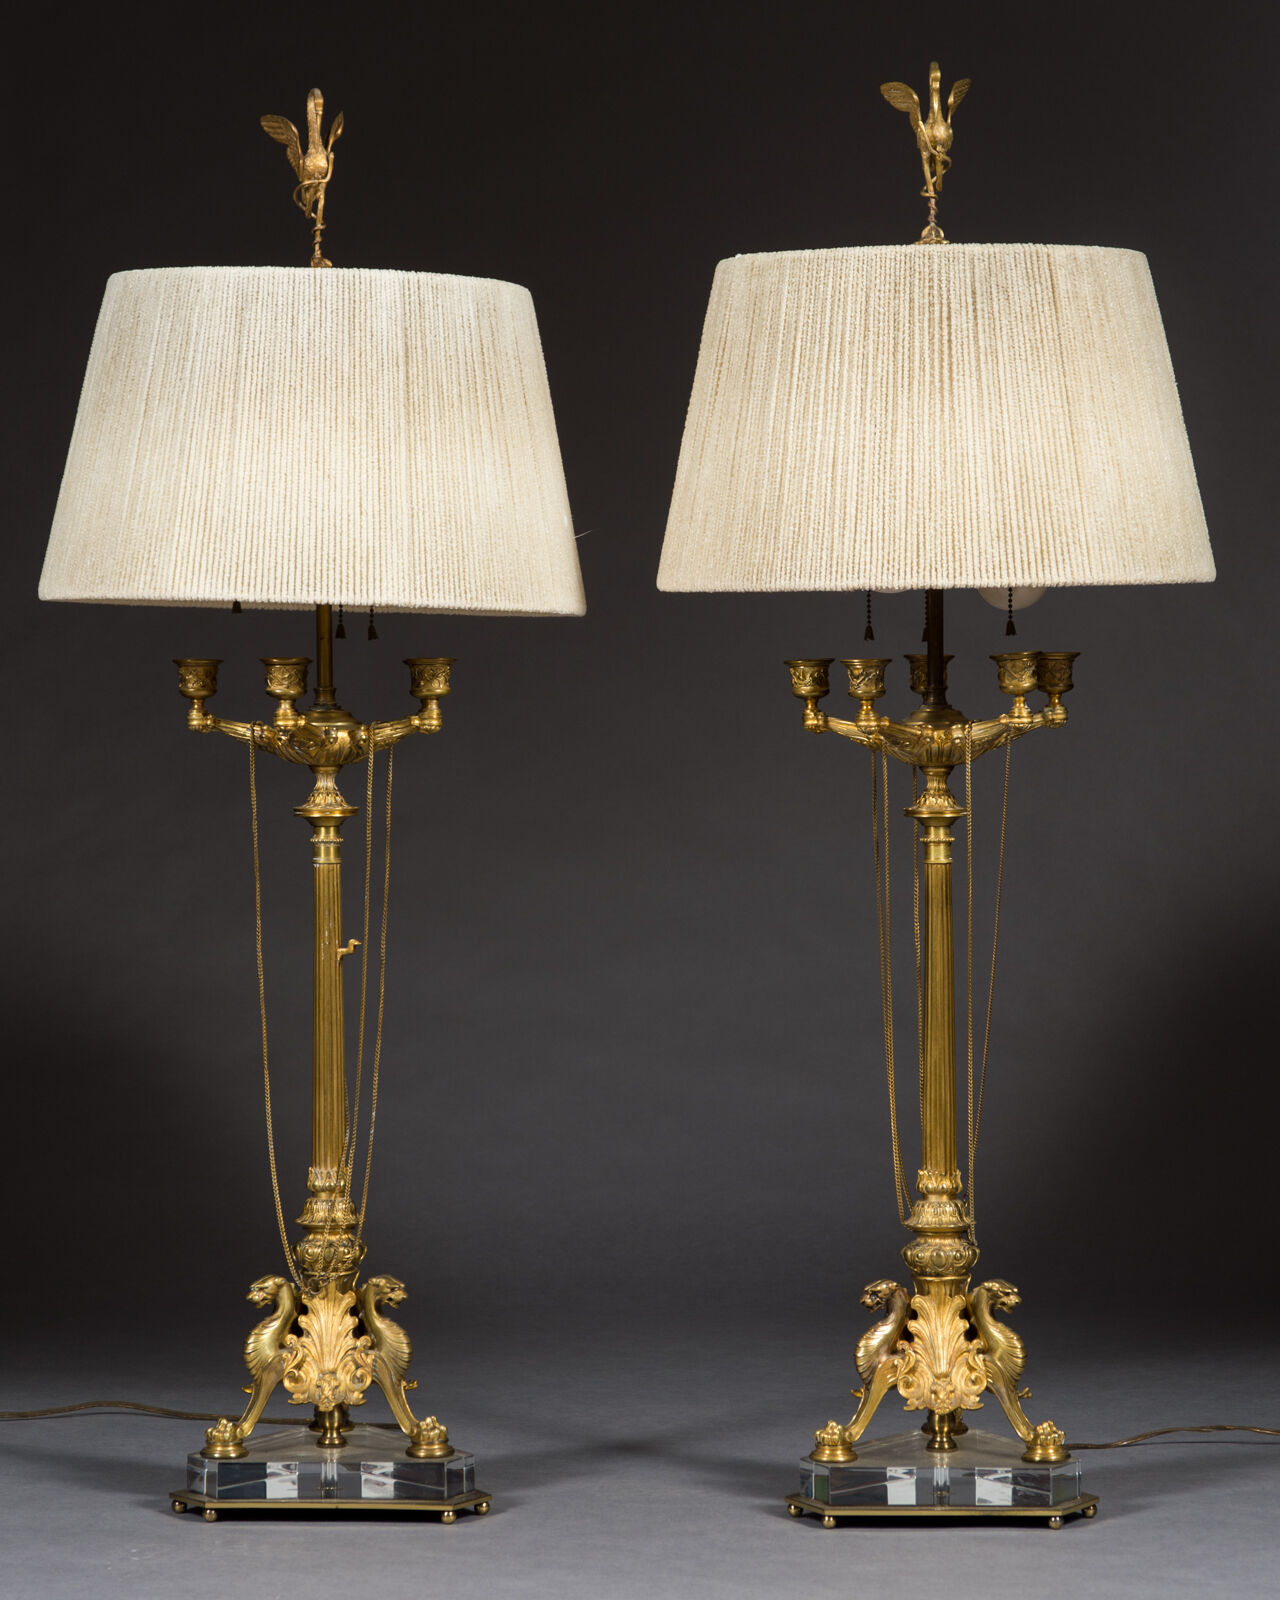 A Very Fine Pair of 19th Century French Napoleon III Gilt Bronze Candelabras